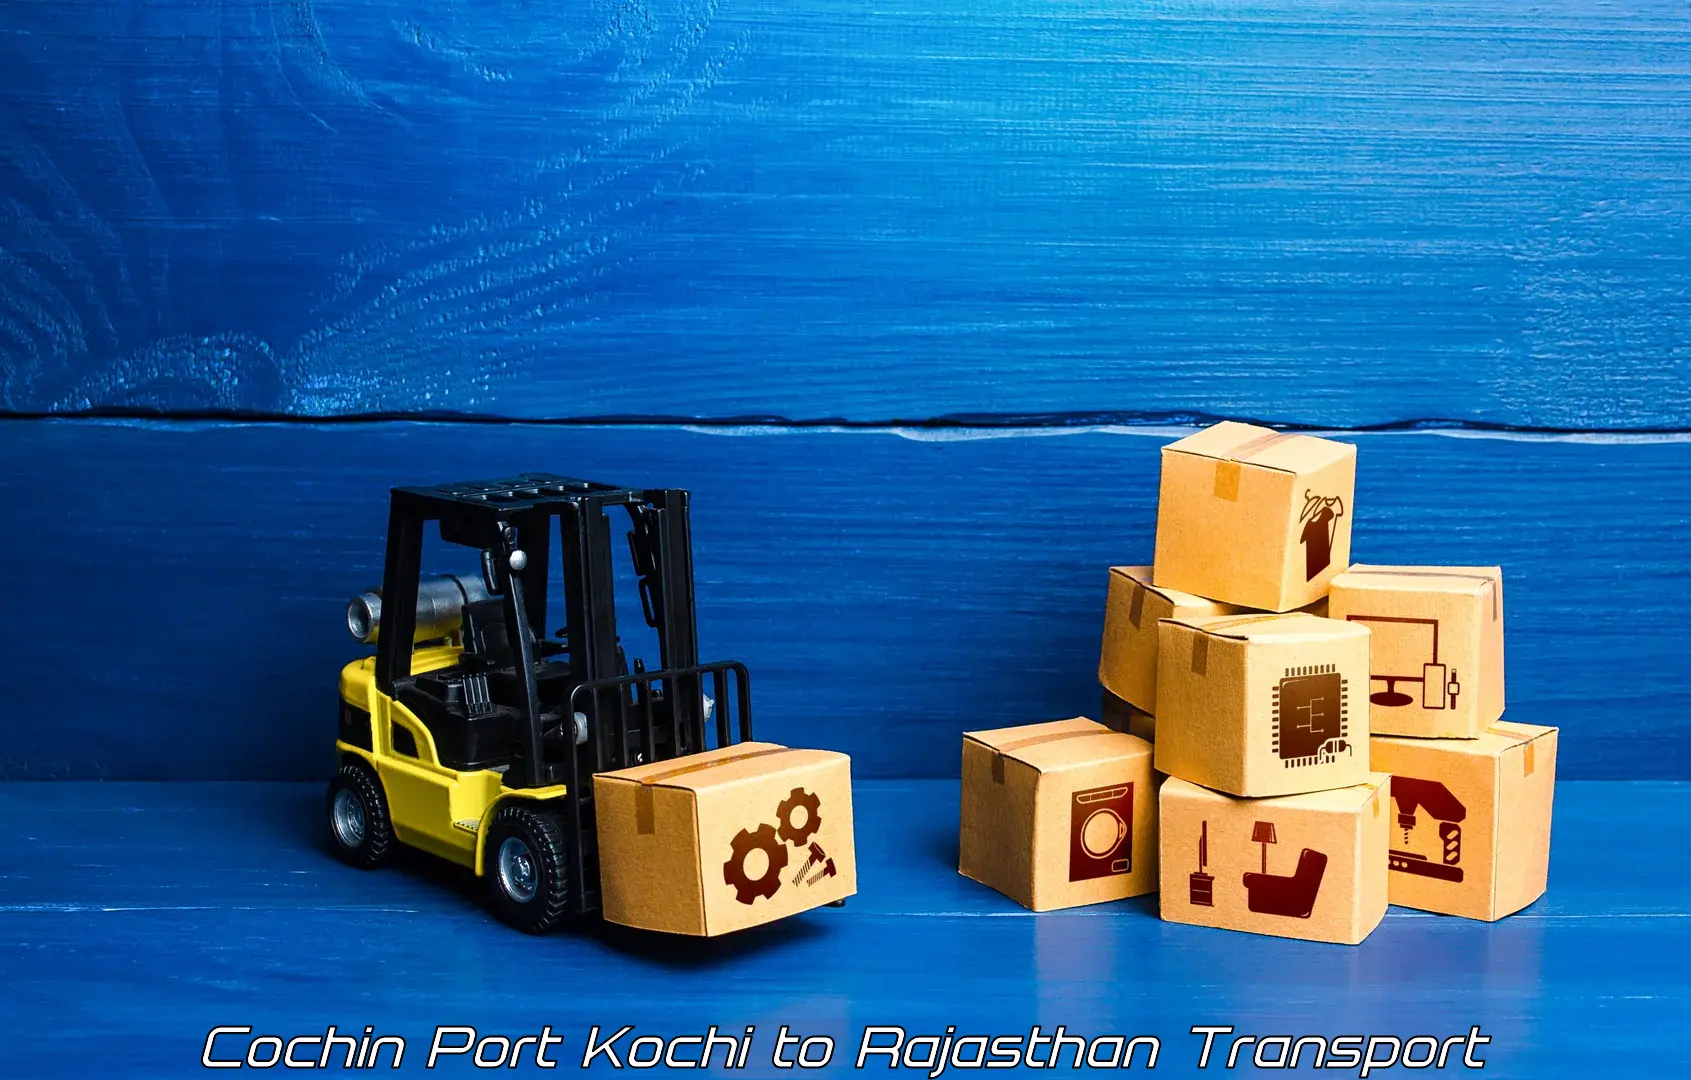 Luggage transport services in Cochin Port Kochi to Didwana